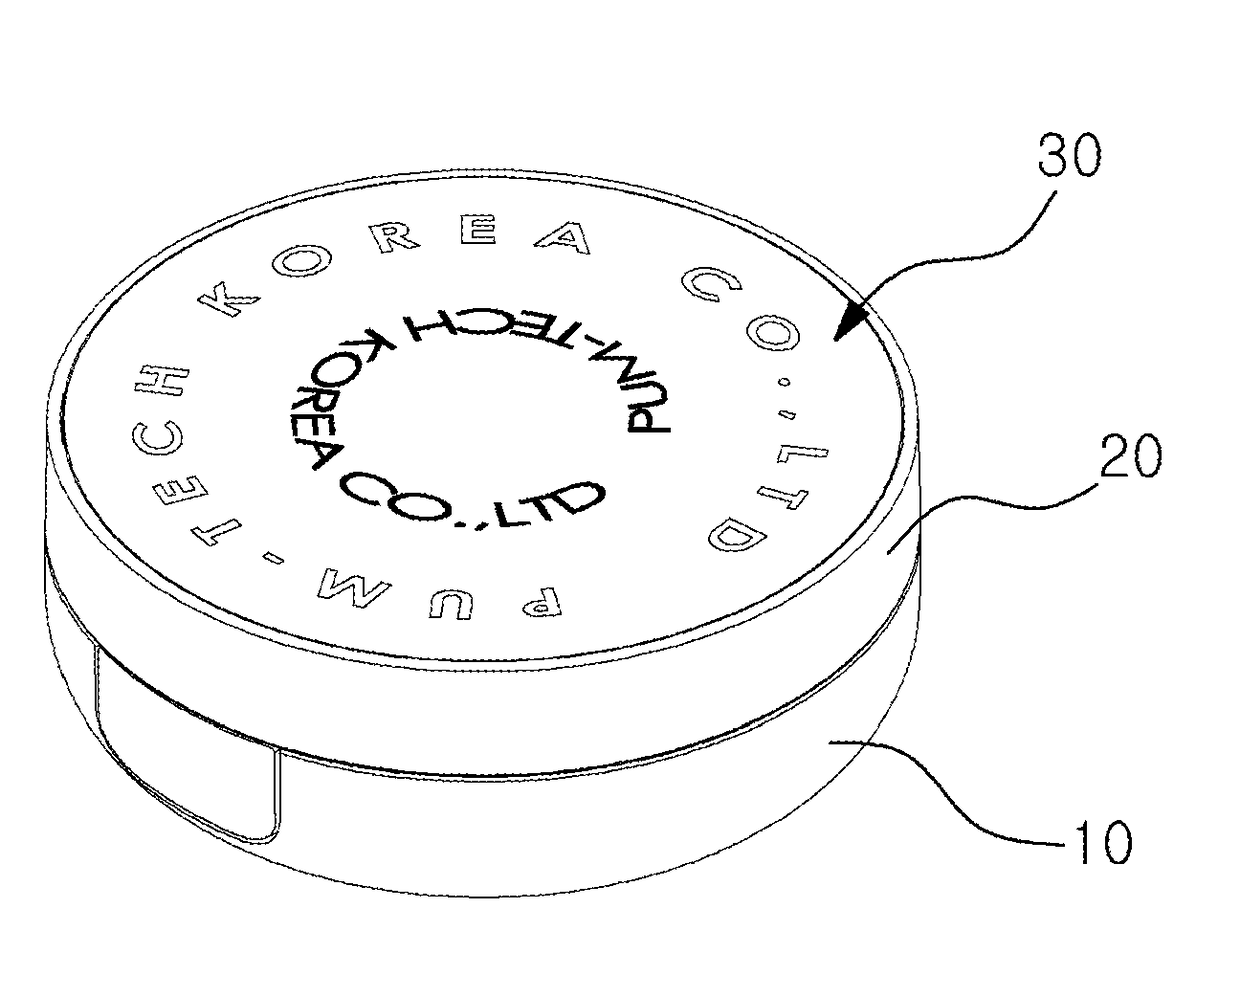 Decorative plate formed on lid of compact case, and method for producing same